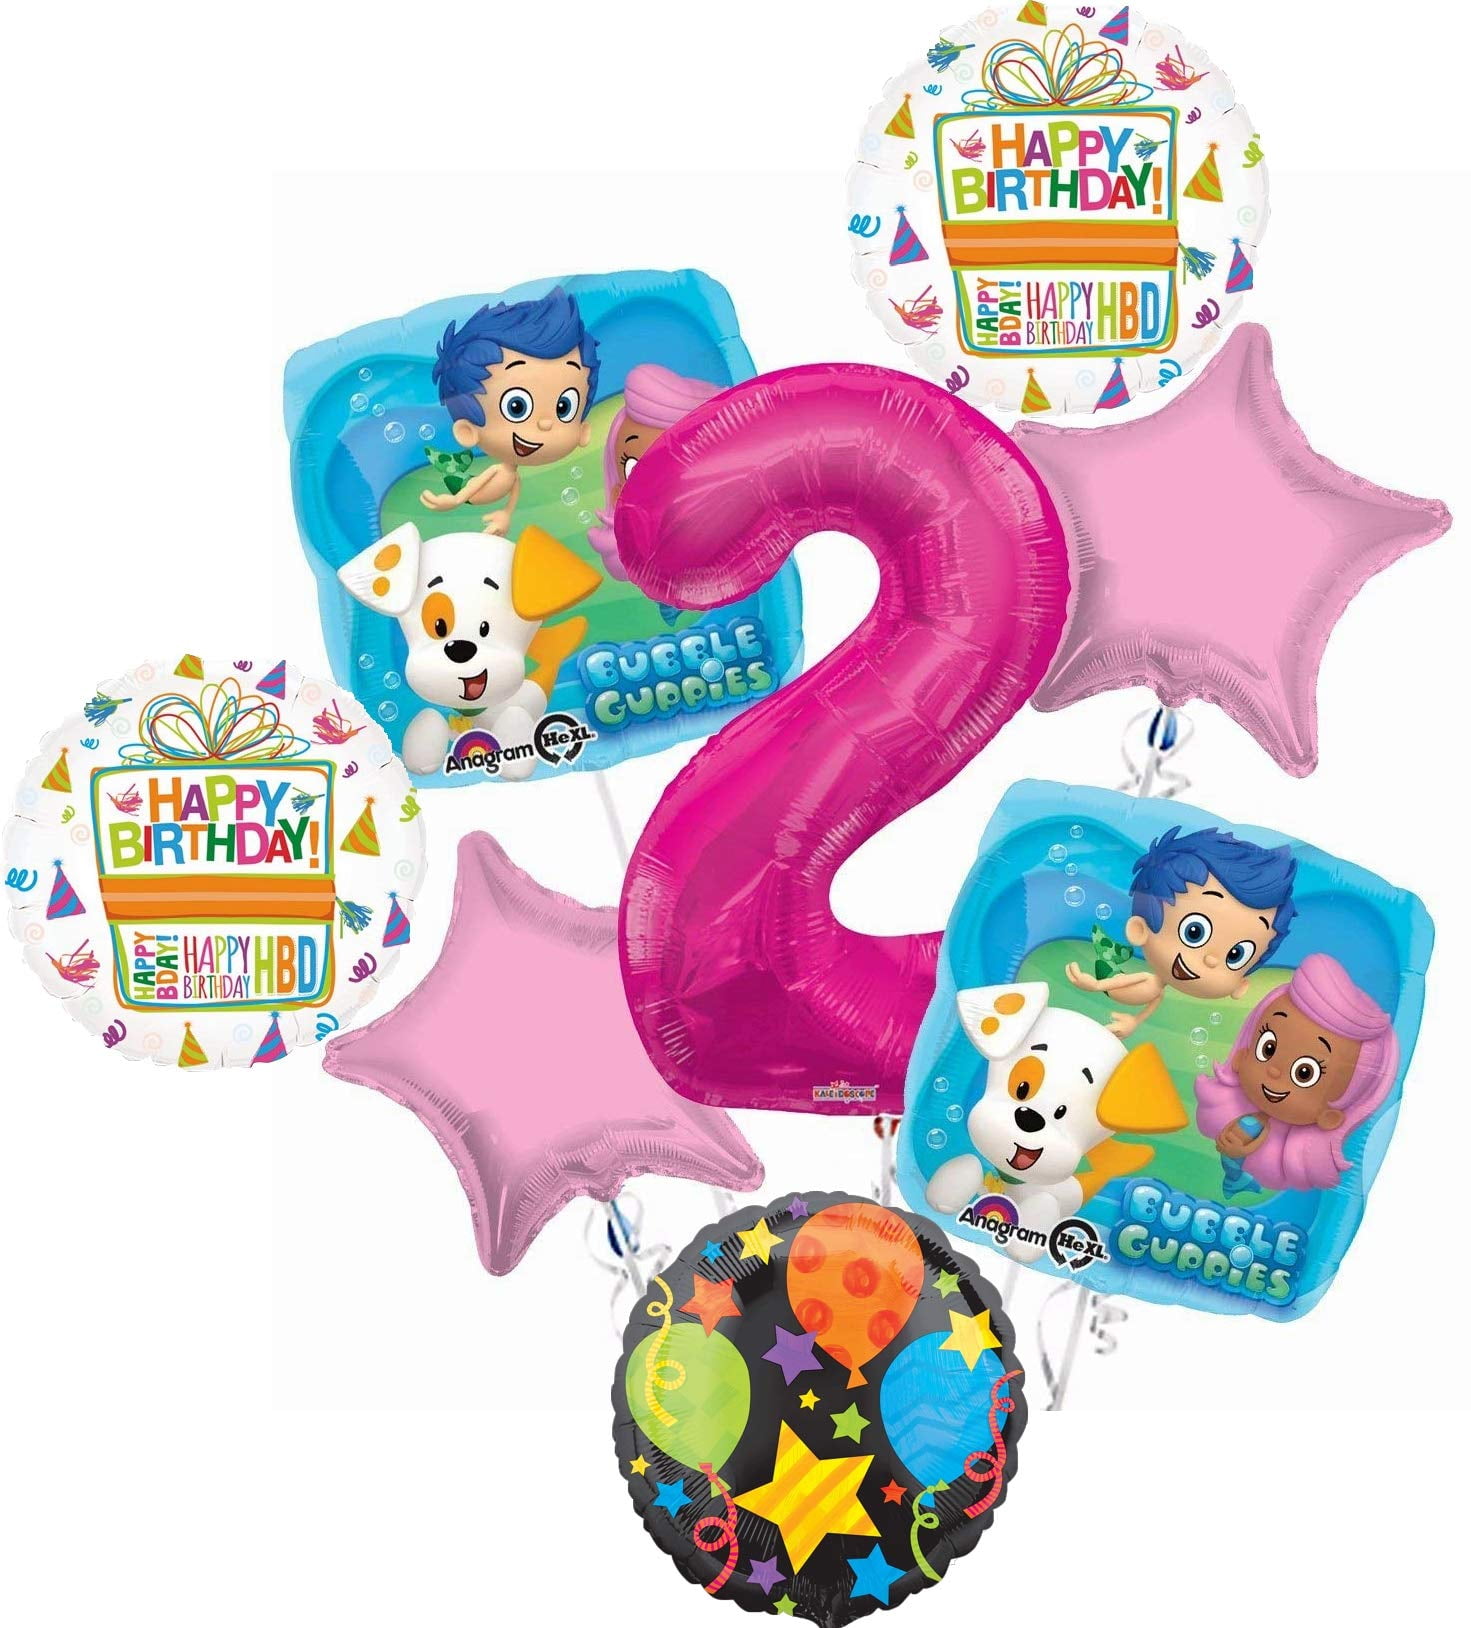 NEW Bubble Guppies XL Birthday Party Balloons Decorations Supplies NEW by Qualatex by Qualatex by Qualatex 